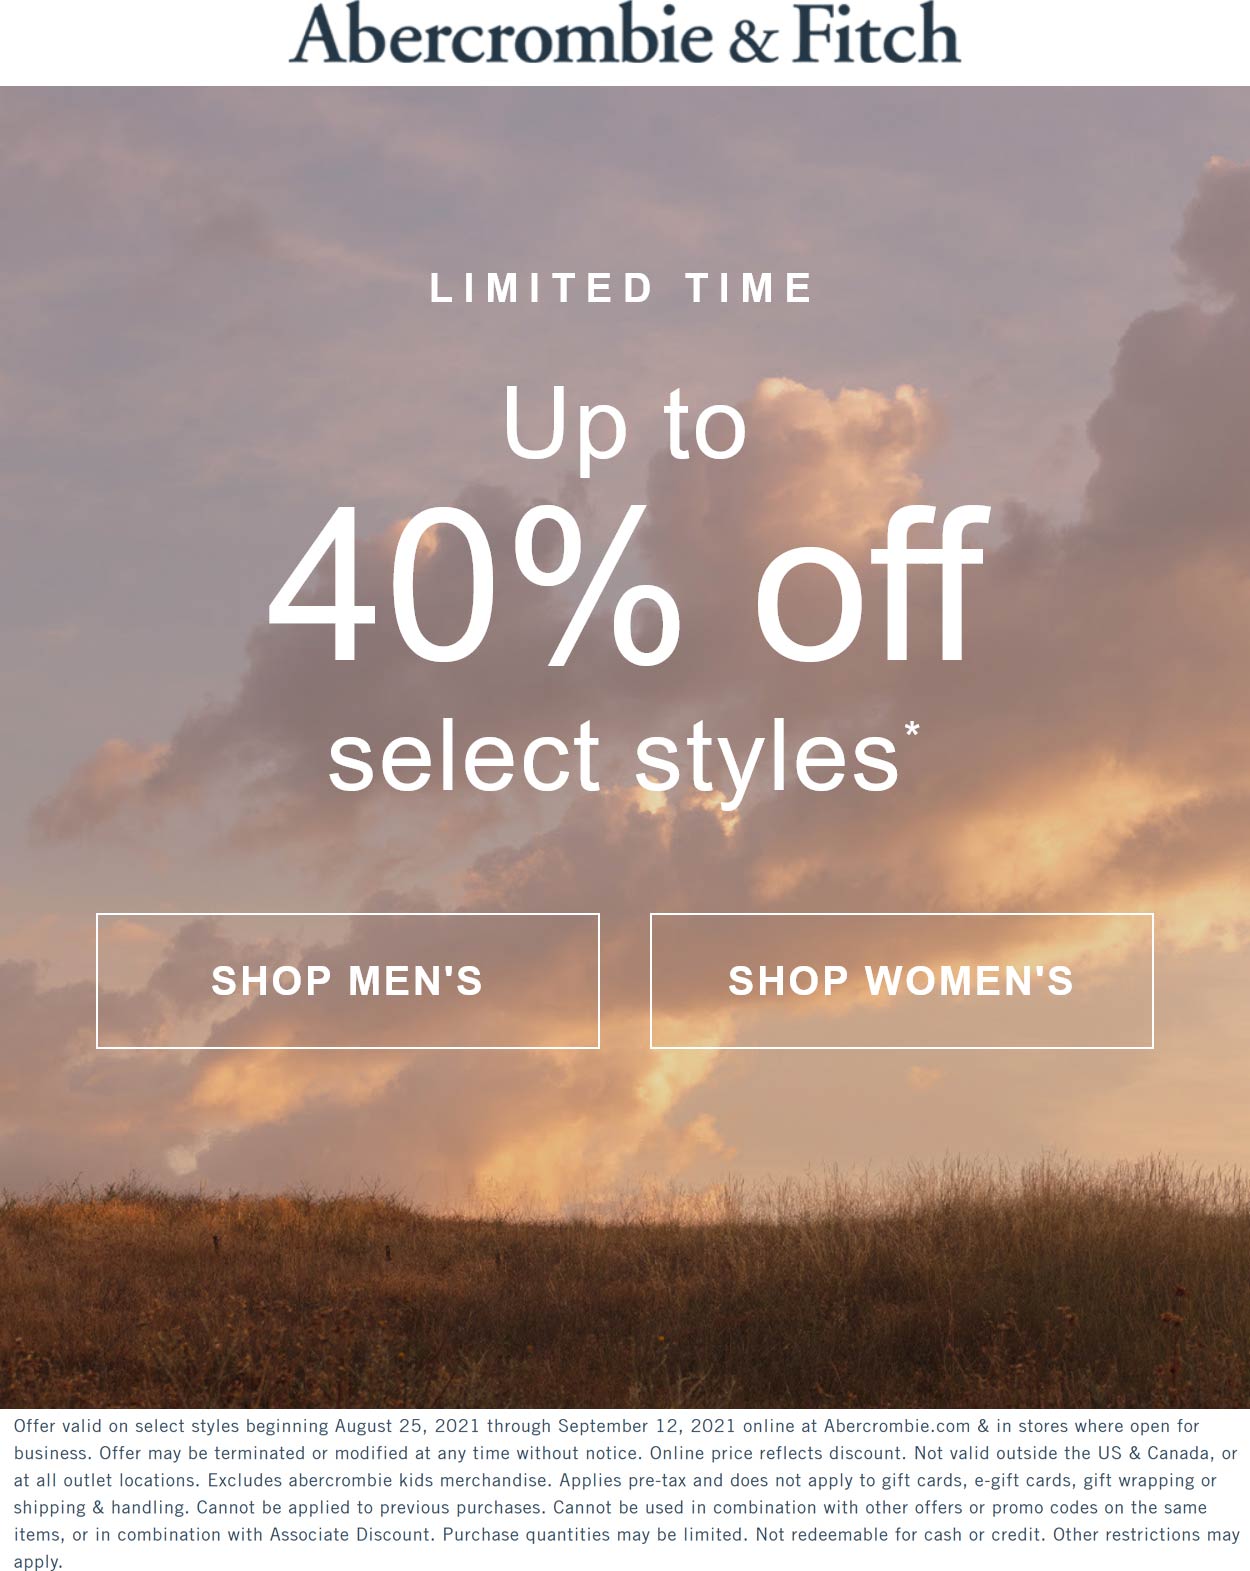 Abercrombie & Fitch stores Coupon  40% off various styles at Abercrombie & Fitch, also online #abercrombiefitch 